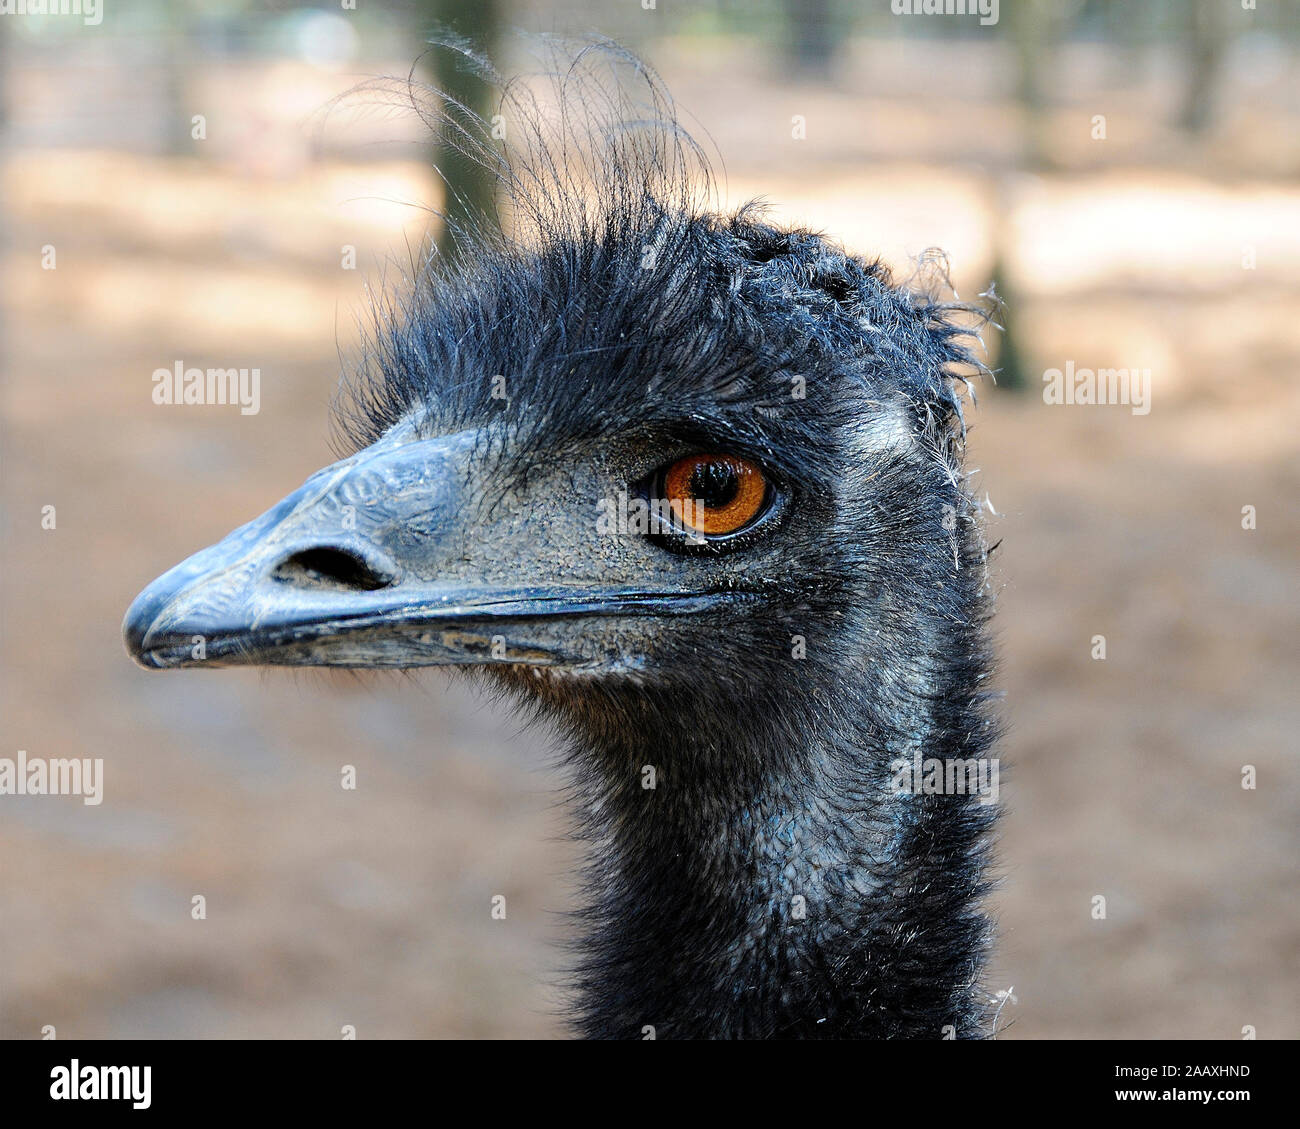 Emu bird head close-up profile view with big eyes, beak, bill, grey-brown shaggy plumage, head in its environment and surrounding. Stock Photo